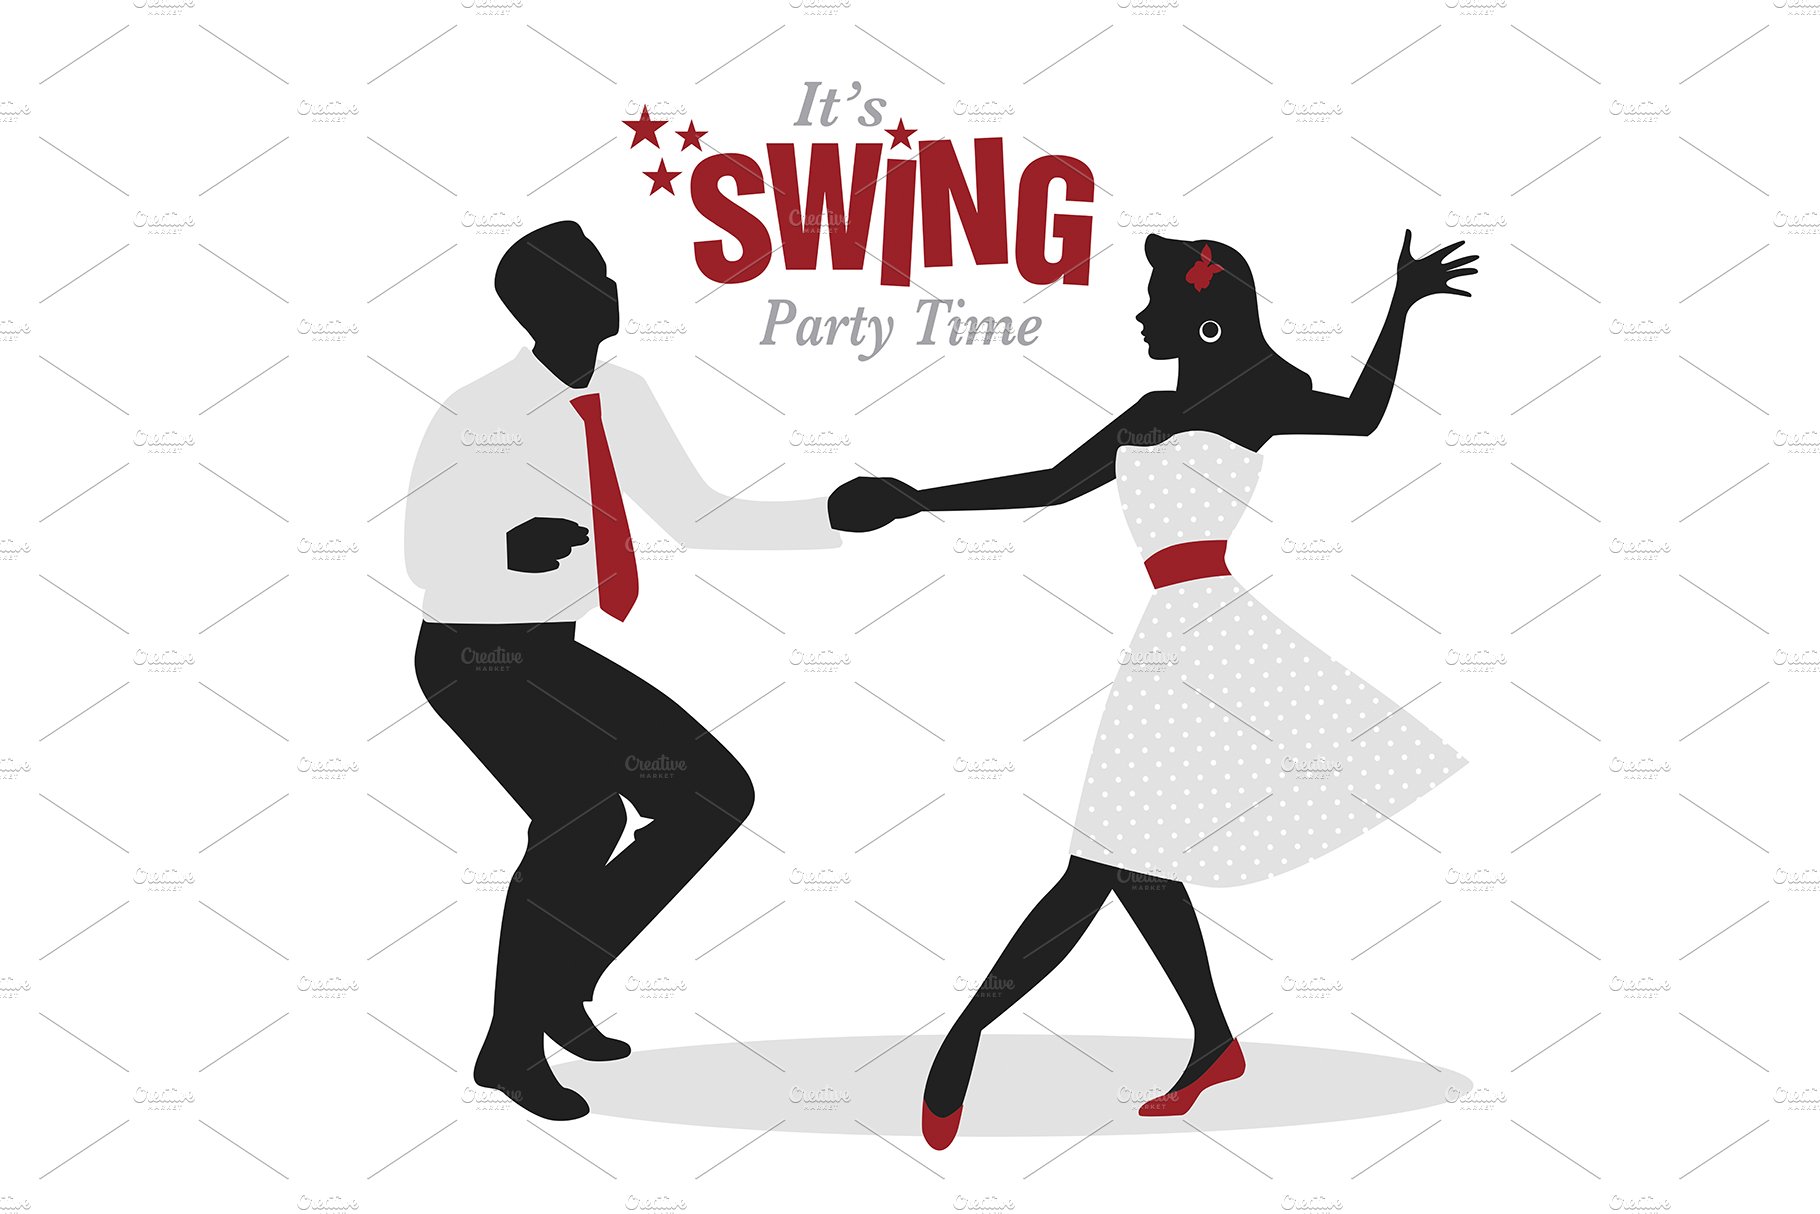 Swing Party Time II cover image.